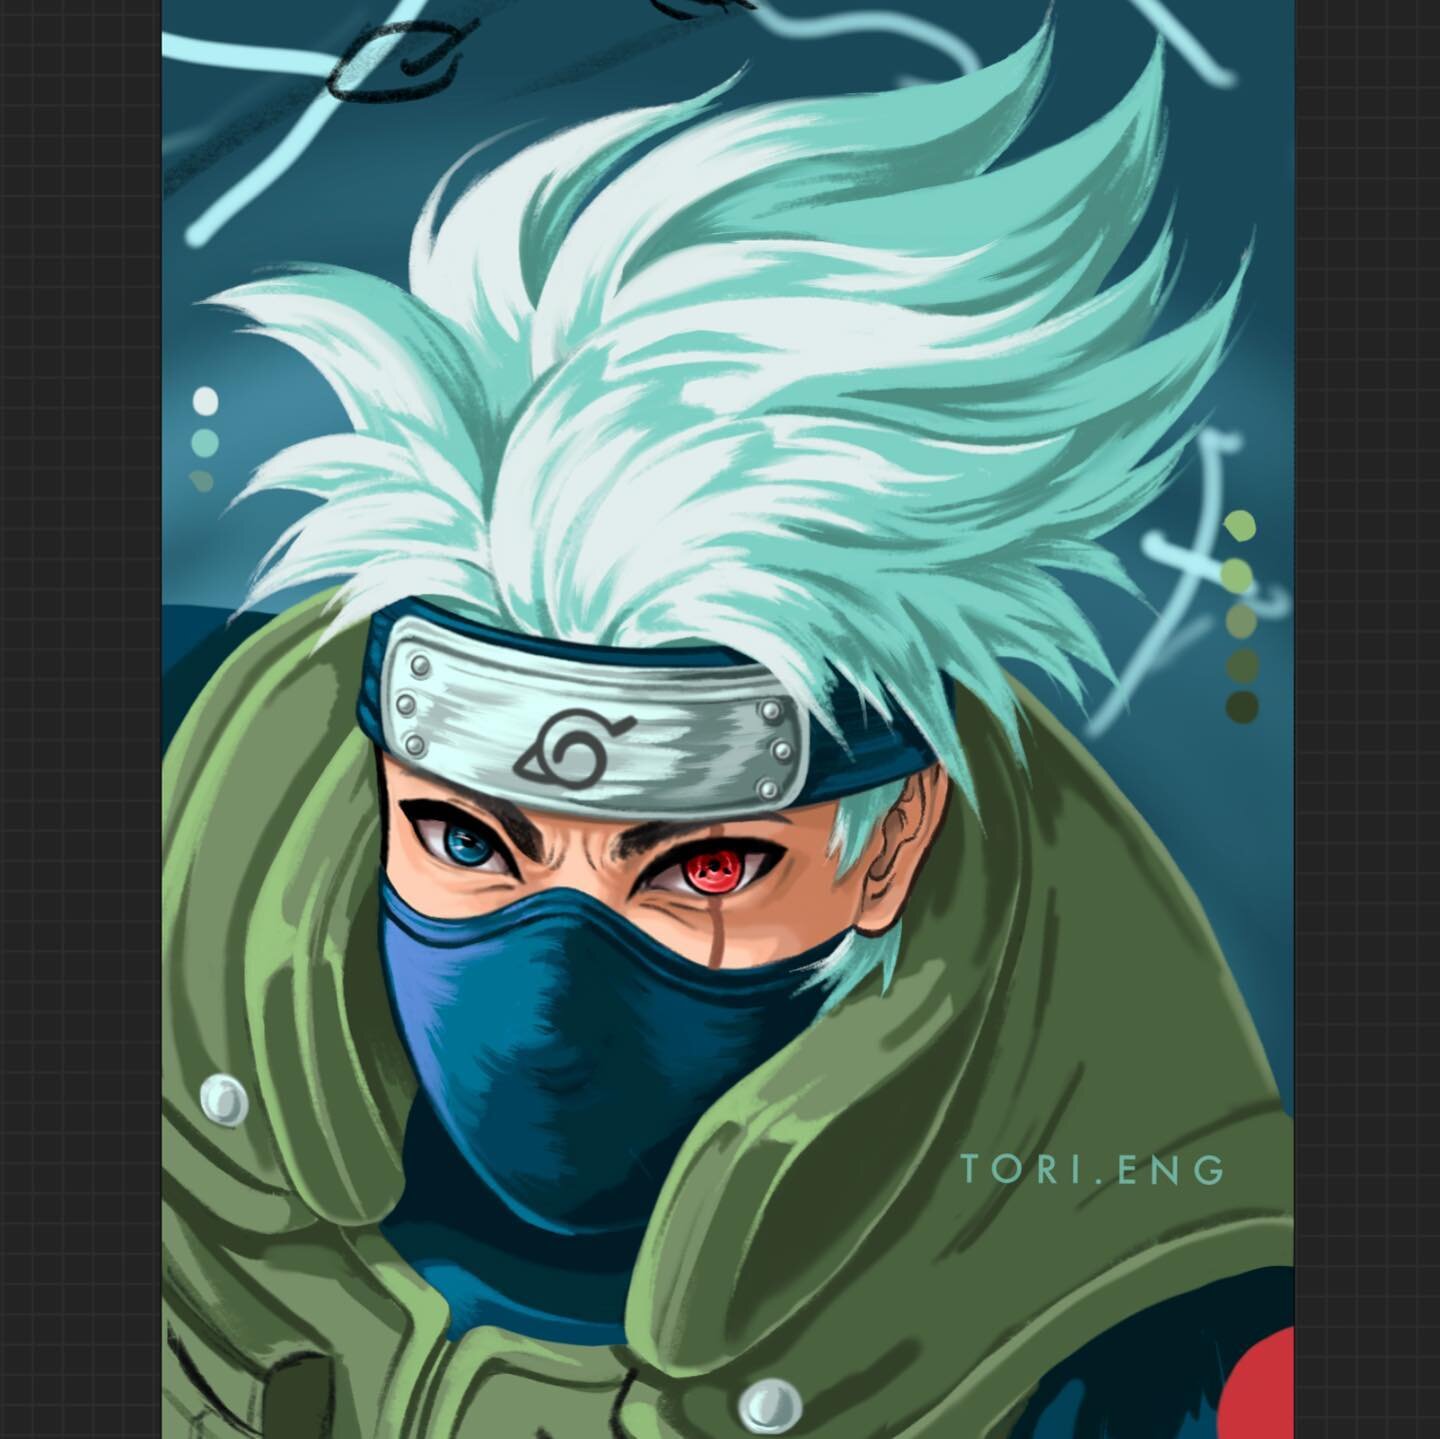 Color update on my Kakashi piece! Zoom in for that eye detail 👁 Drawing his hair was so much fun (FYI love making hair art!) Since my style is more line based, hair always seemed like the perfect substance that would just flow when I draw 💁🏻&zwj;♀